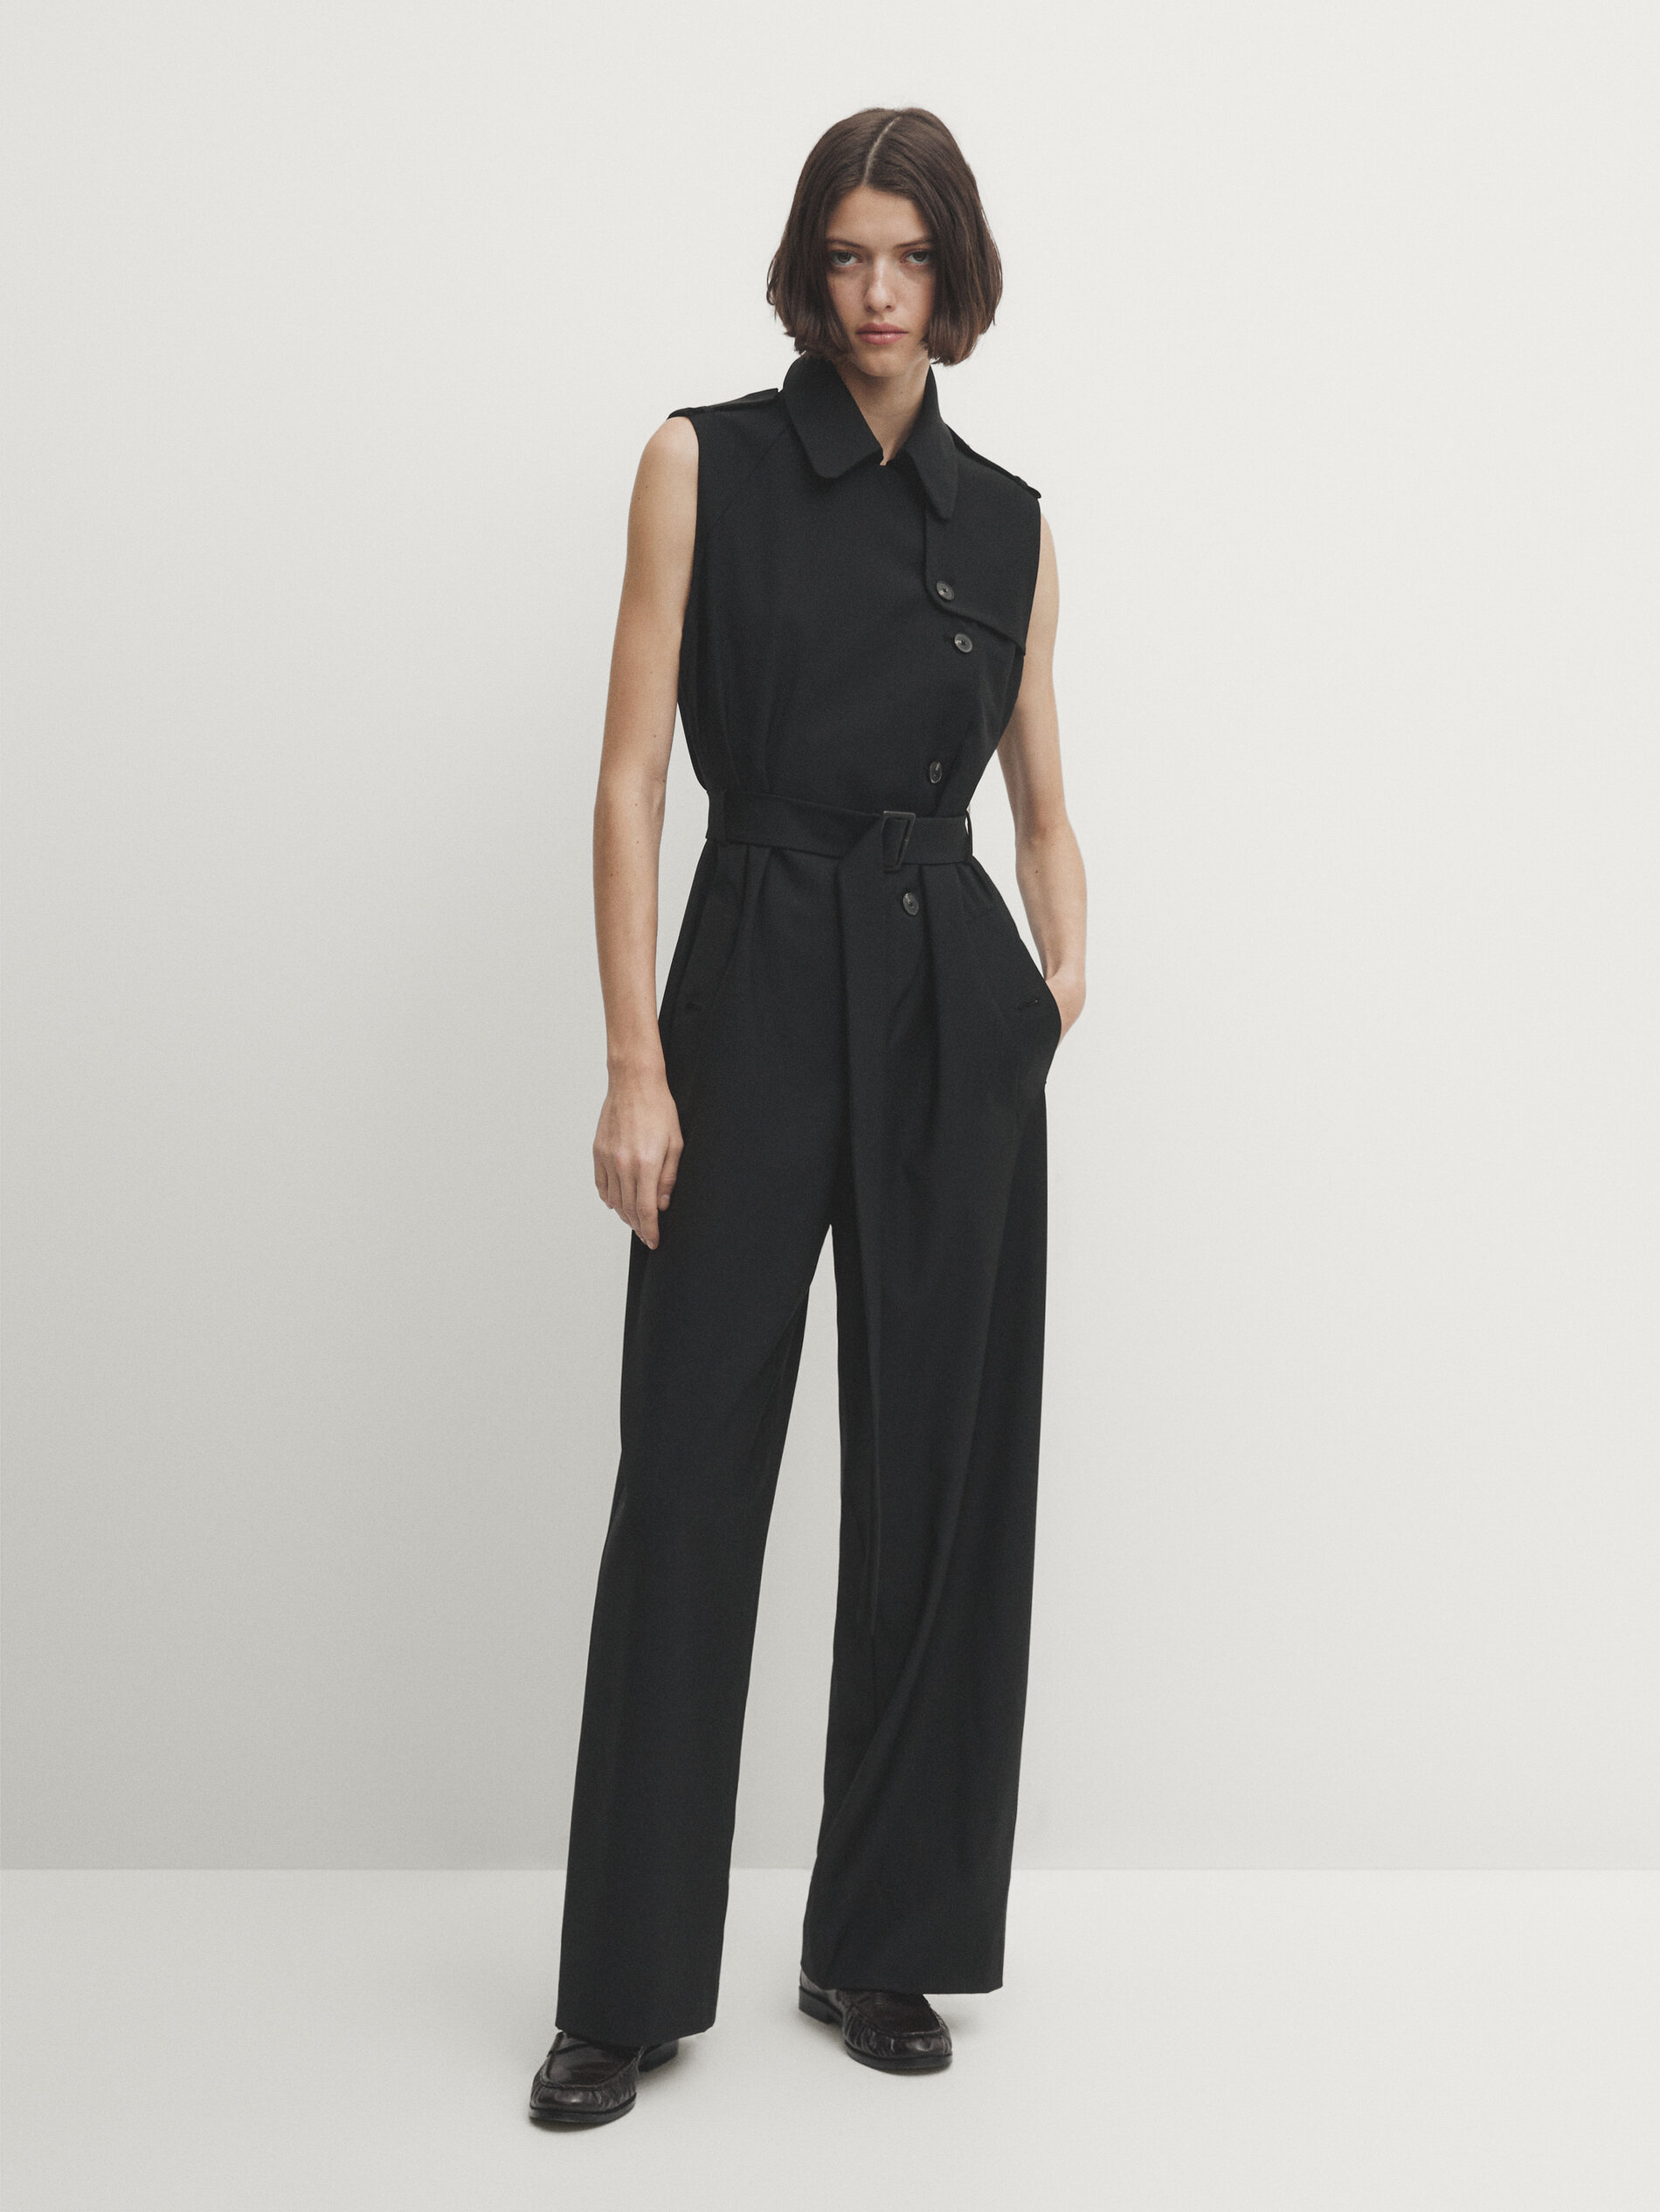 LIMITED COLLECTION Plus Size Black Jumpsuit | Yours Clothing